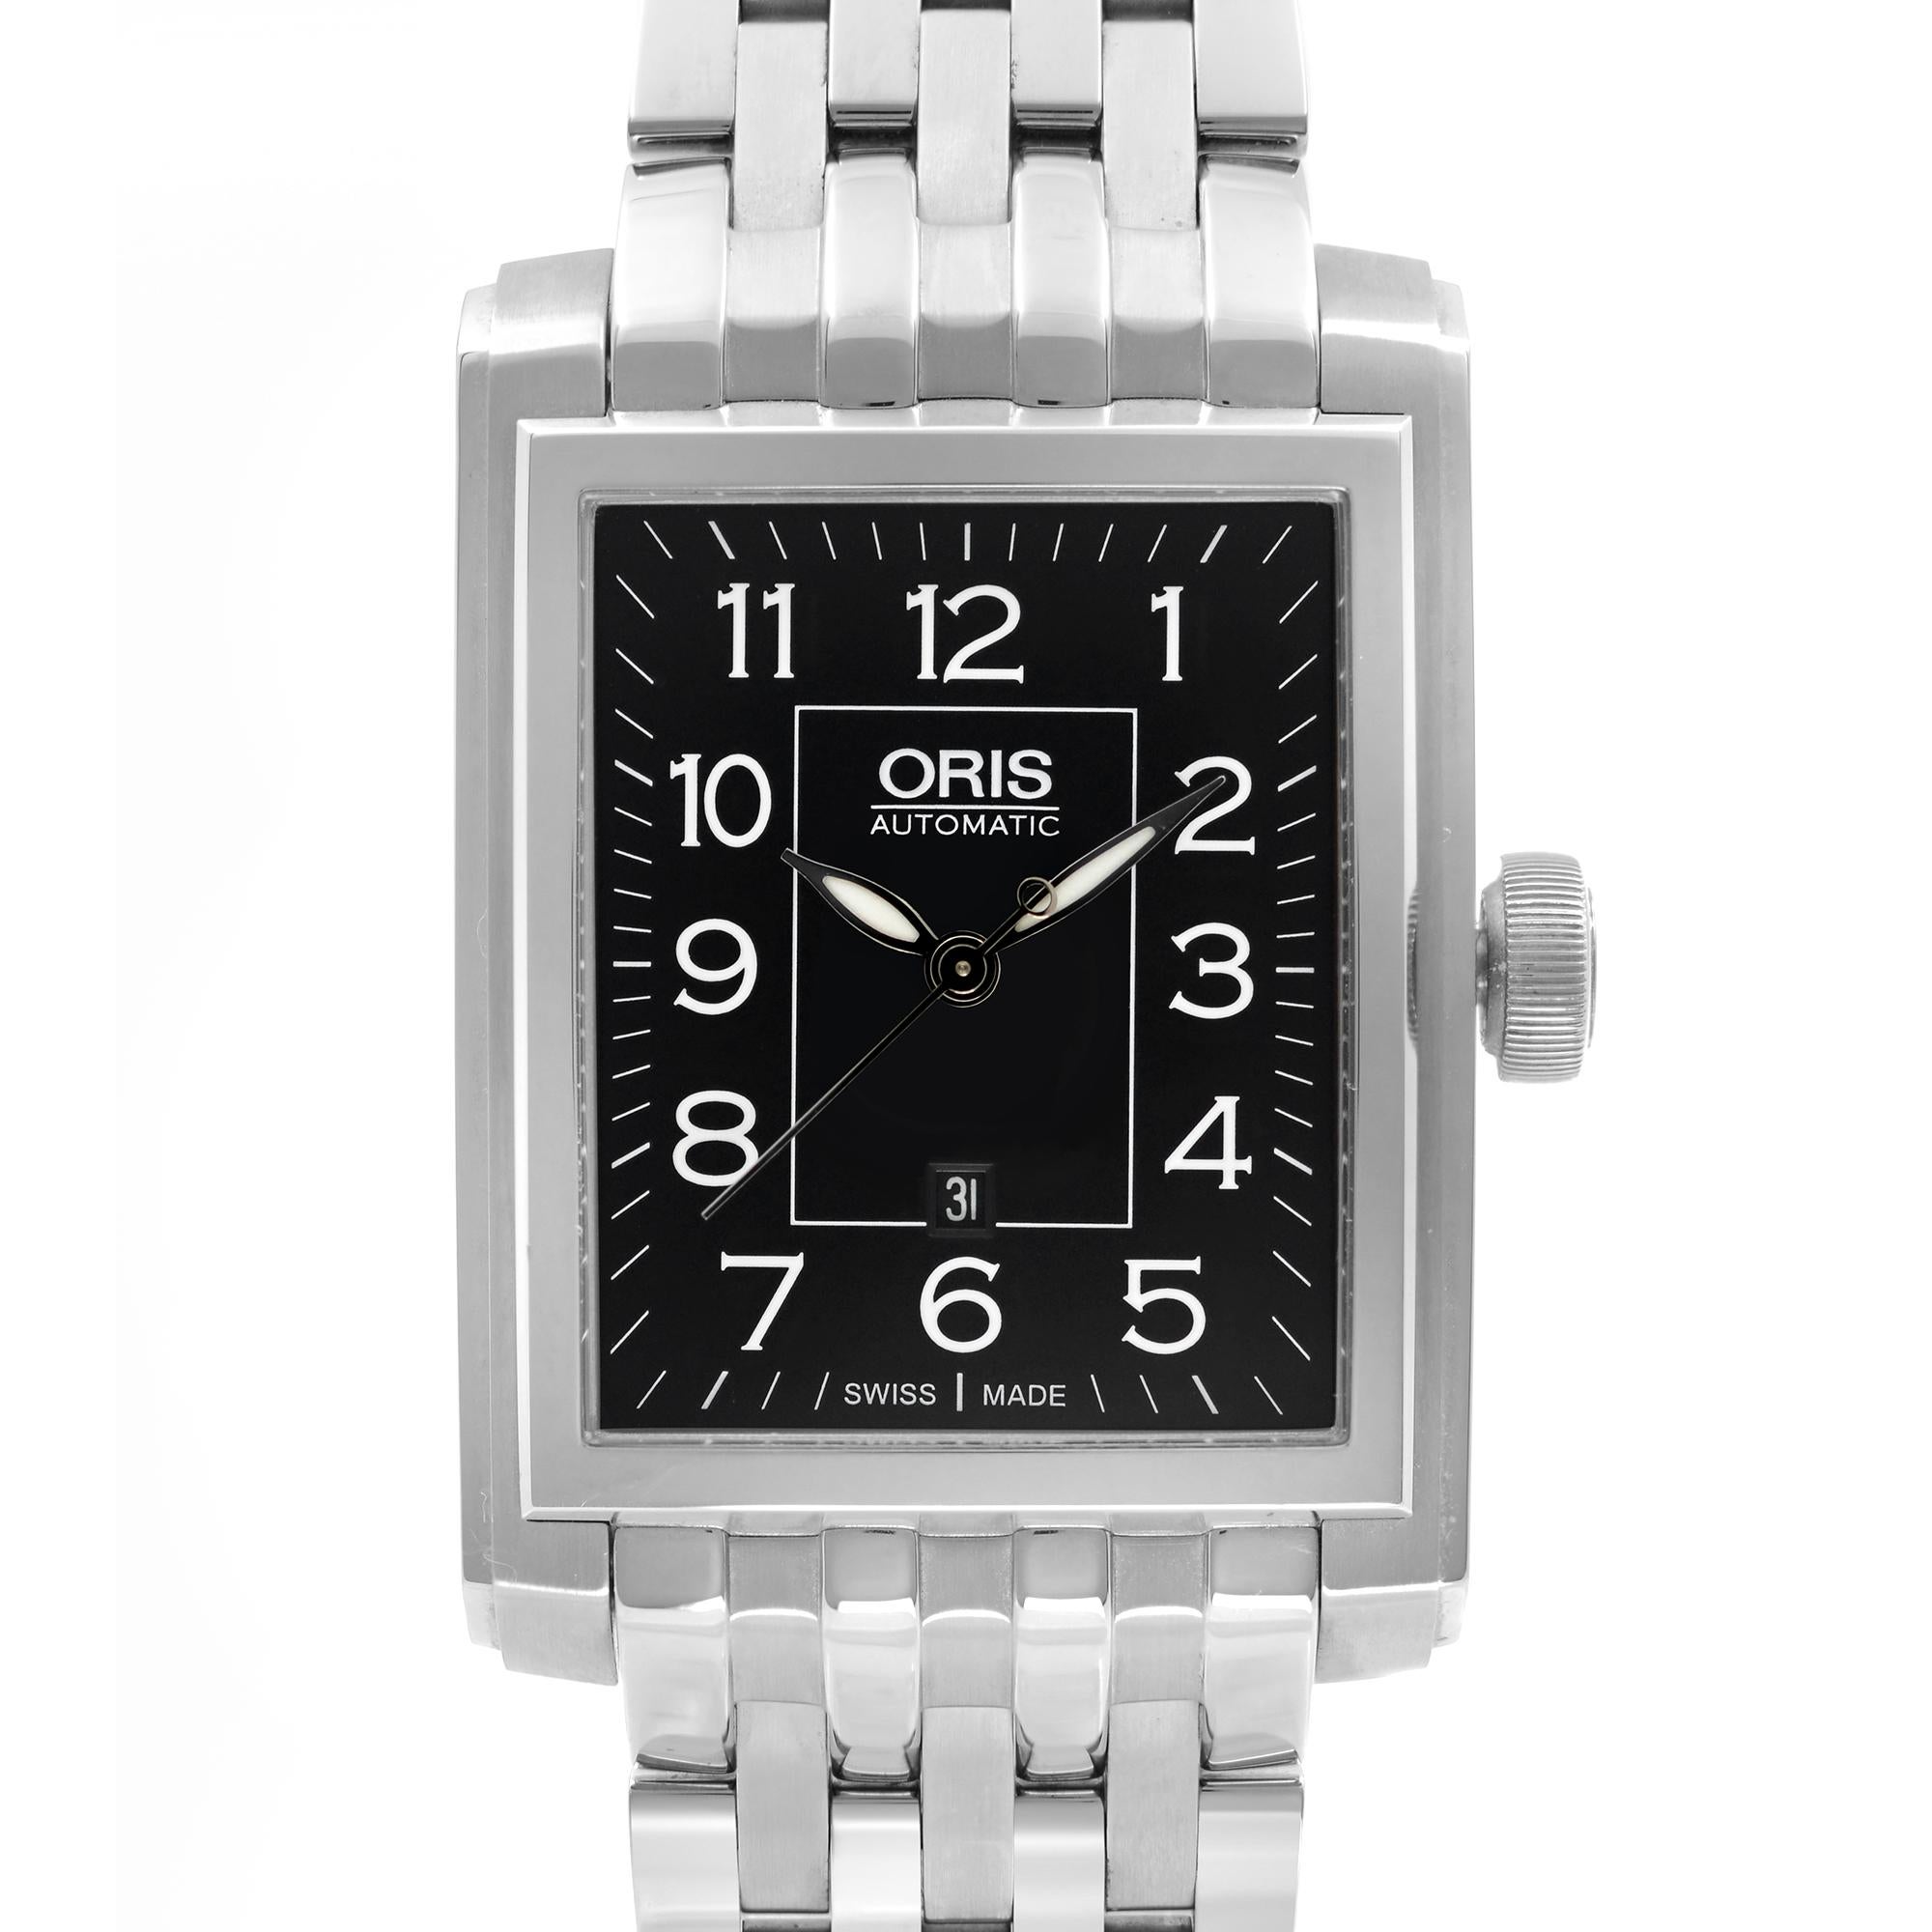 Store Display Model. Oris Rectangular Date Steel Black Dial Men's Watch 01 561 7657 4034-07 8 21 82. This Beautiful Timepiece Features Multi-piece stainless steel Case, Sapphire, Domed on Both Sides, an Anti-reflective coating inside, and a Black